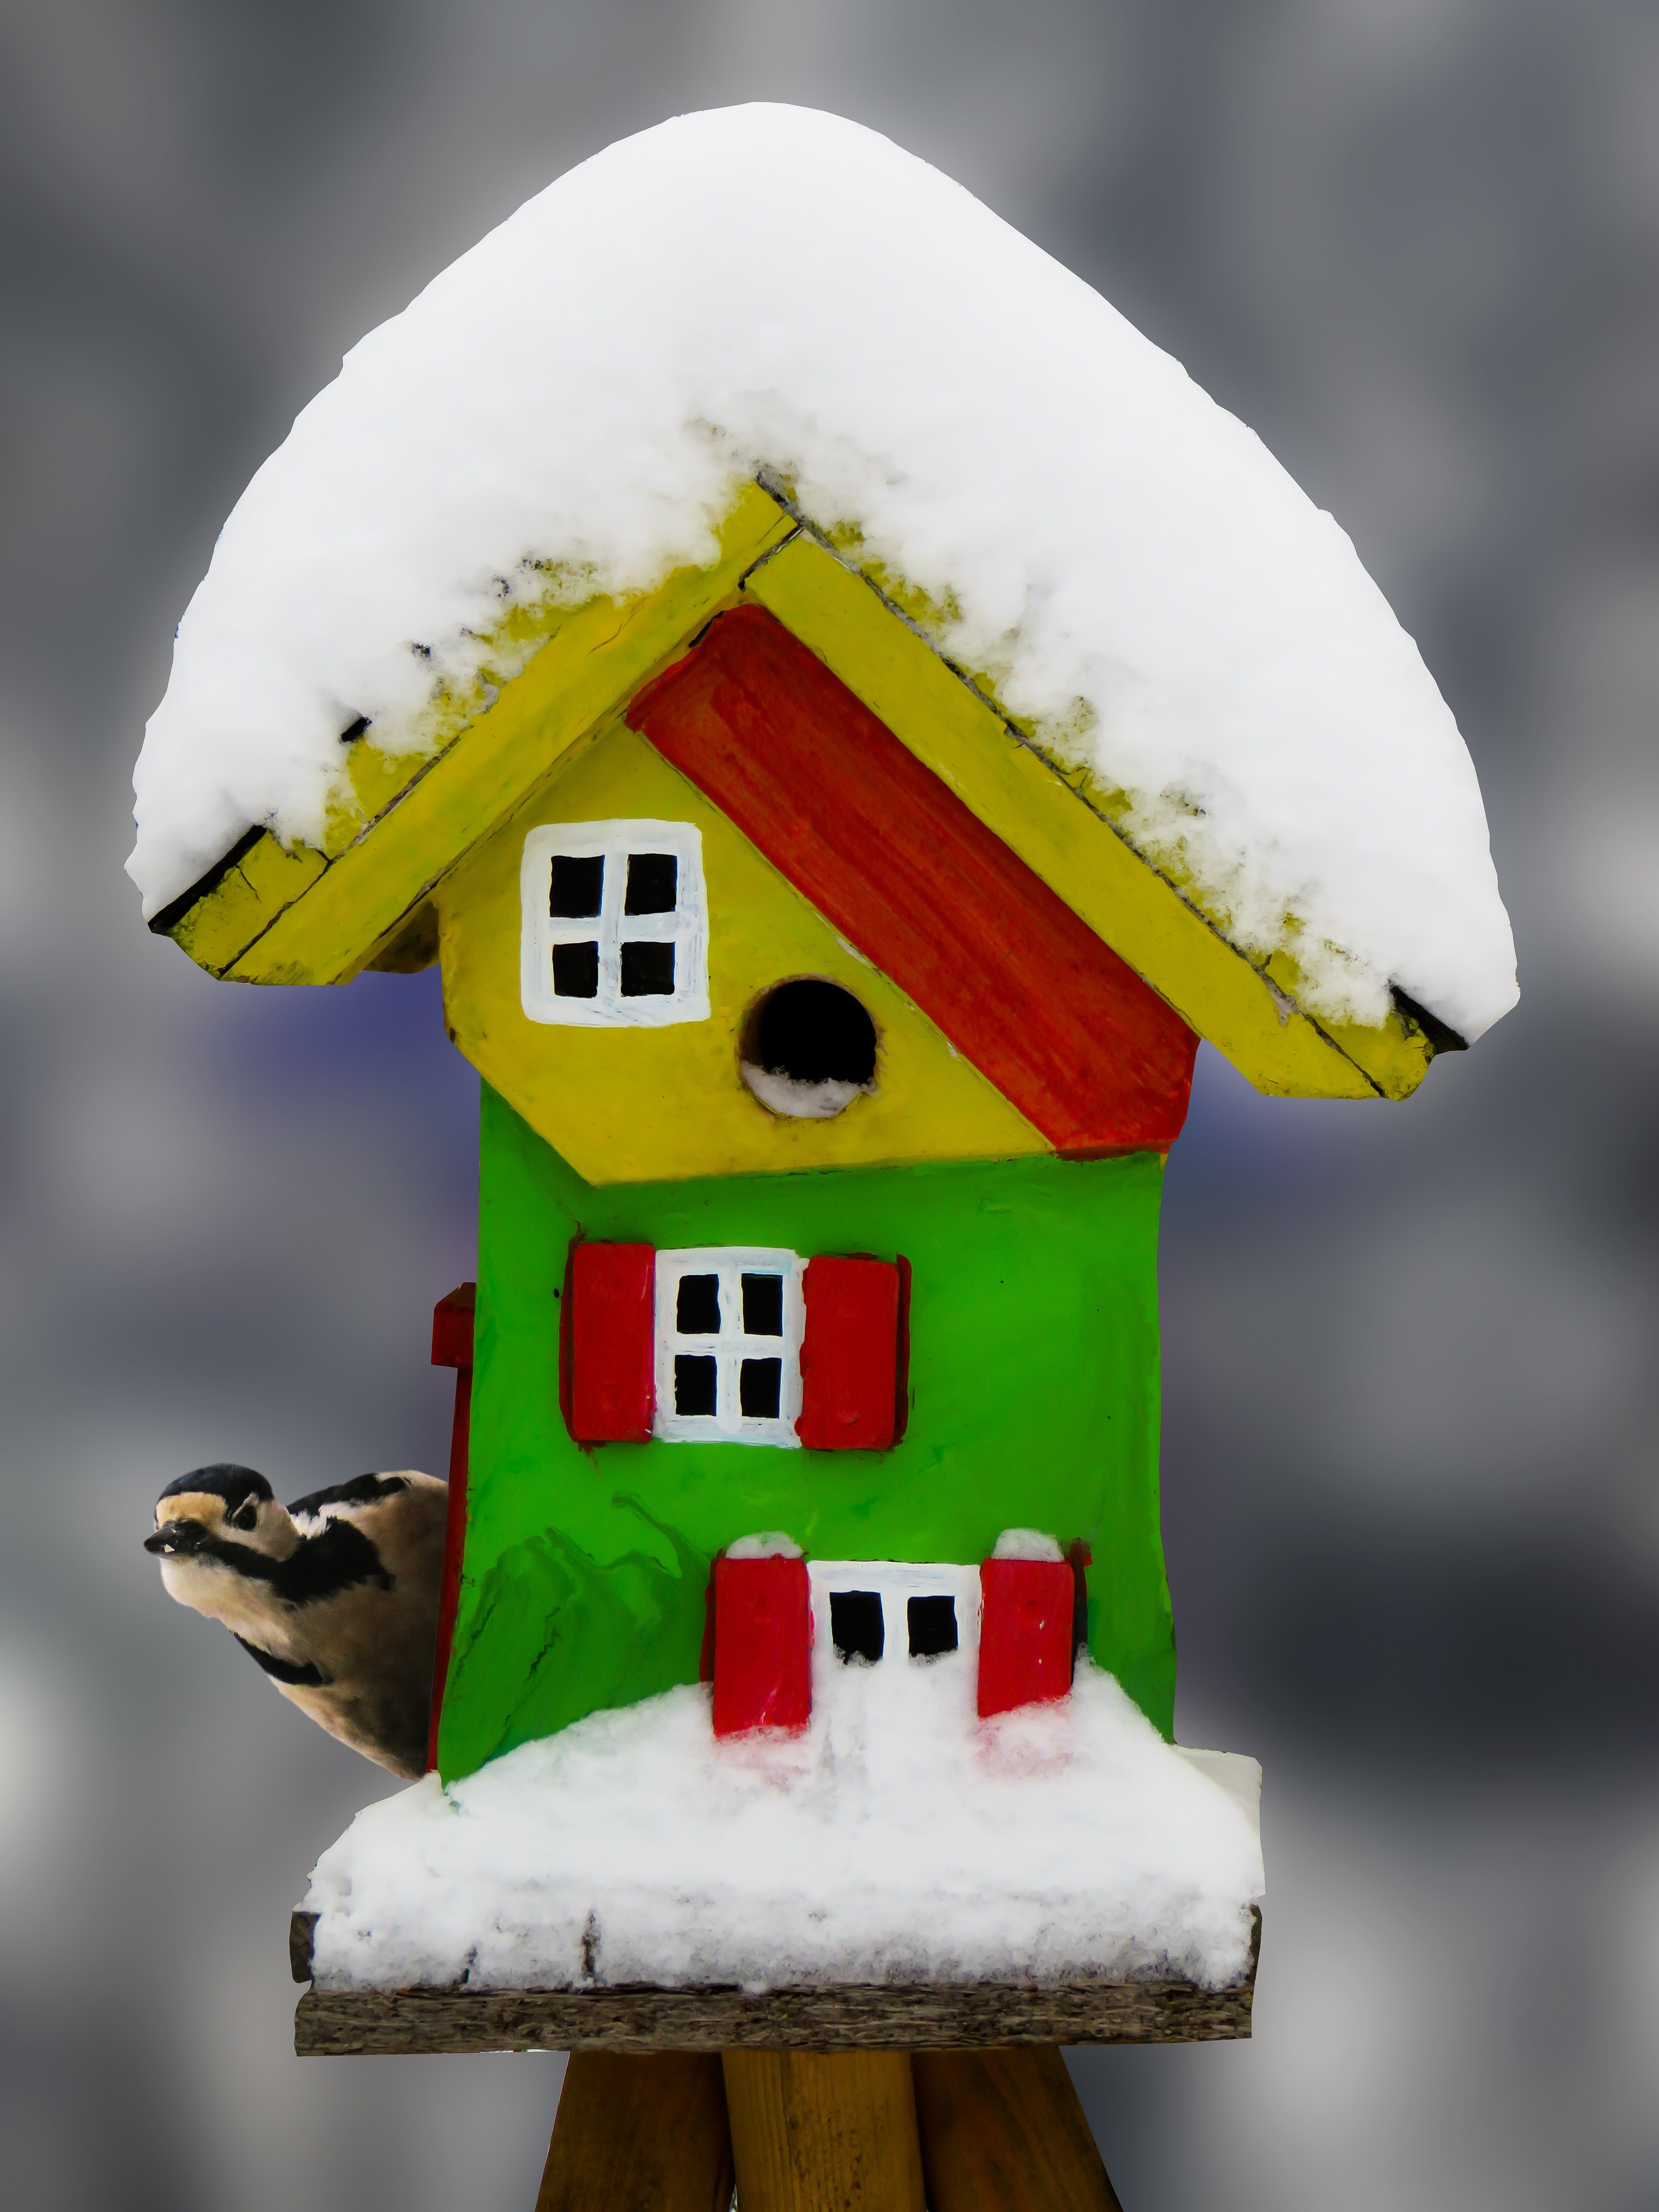 white yellow and green wooden house toy